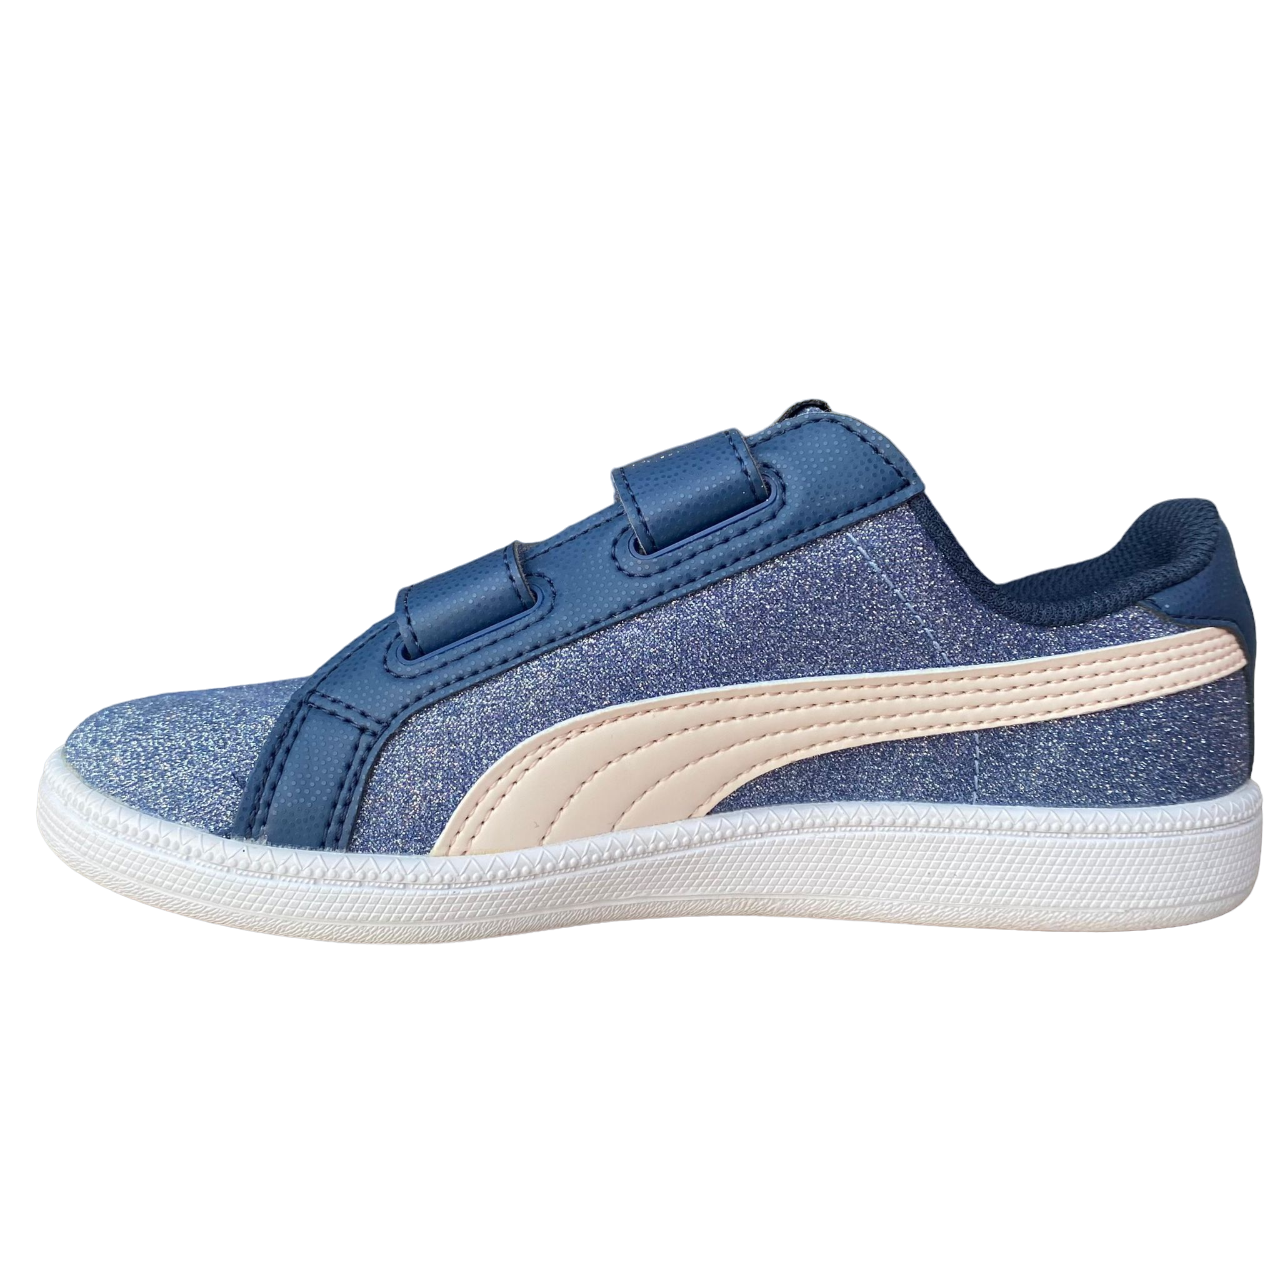 Puma girl&#39;s sneakers shoe with Smash glitter tear V PS 362956 04 blue